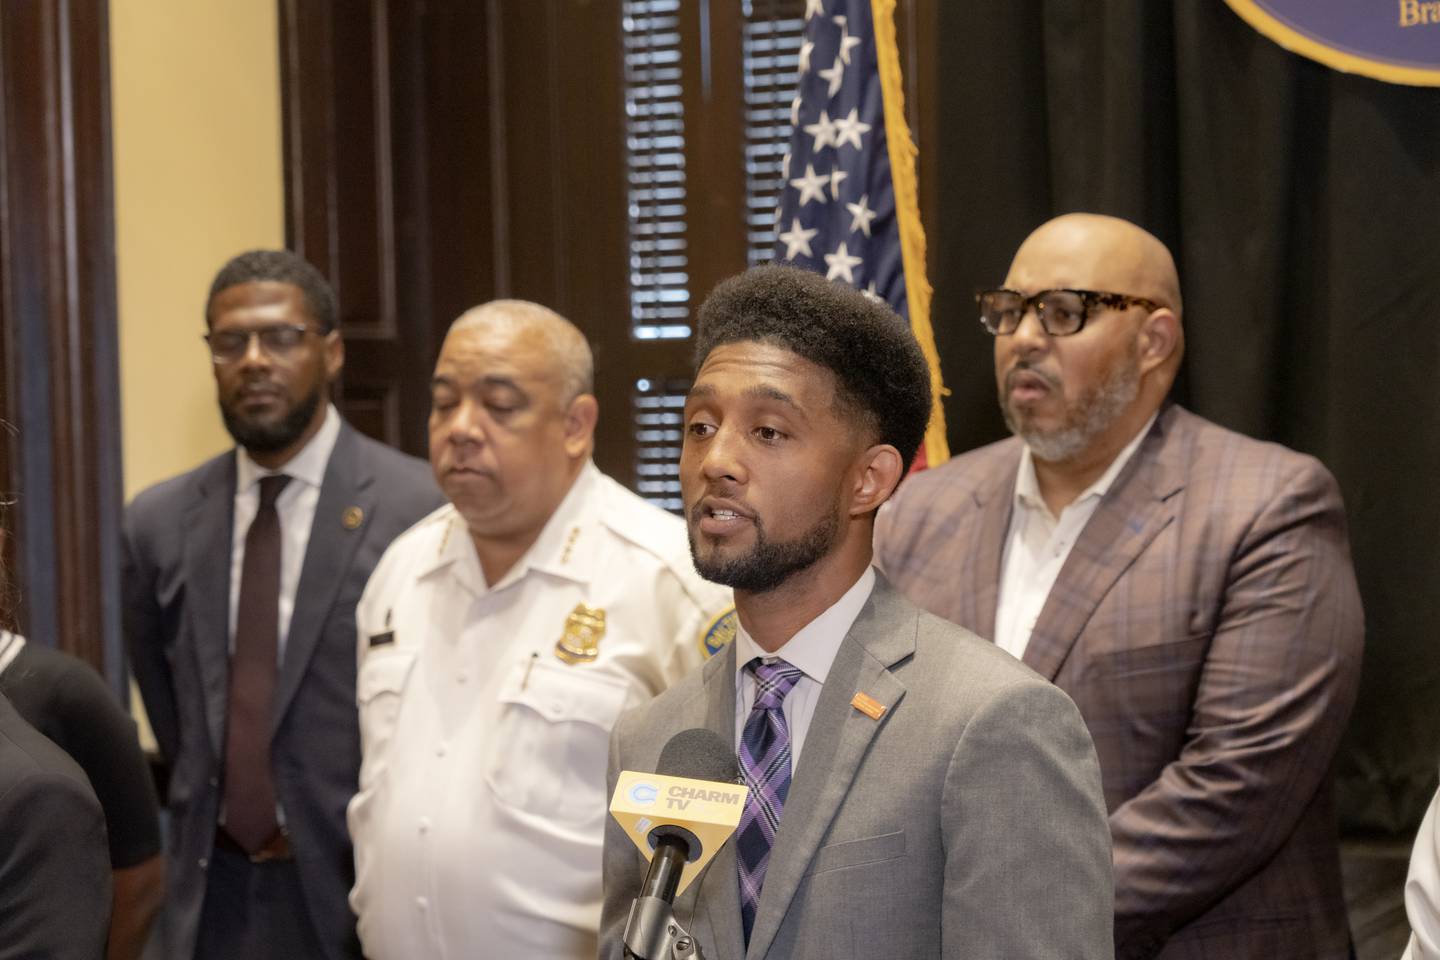 Anthony Barksdale, a former acting Baltimore police commissioner (who directed operations for the Police Department from 2007 to 2012) and often vocal critic of the Baltimore Police Department, has been named deputy mayor for public safety, Mayor Brandon Scott announced Friday 7/8/2022.